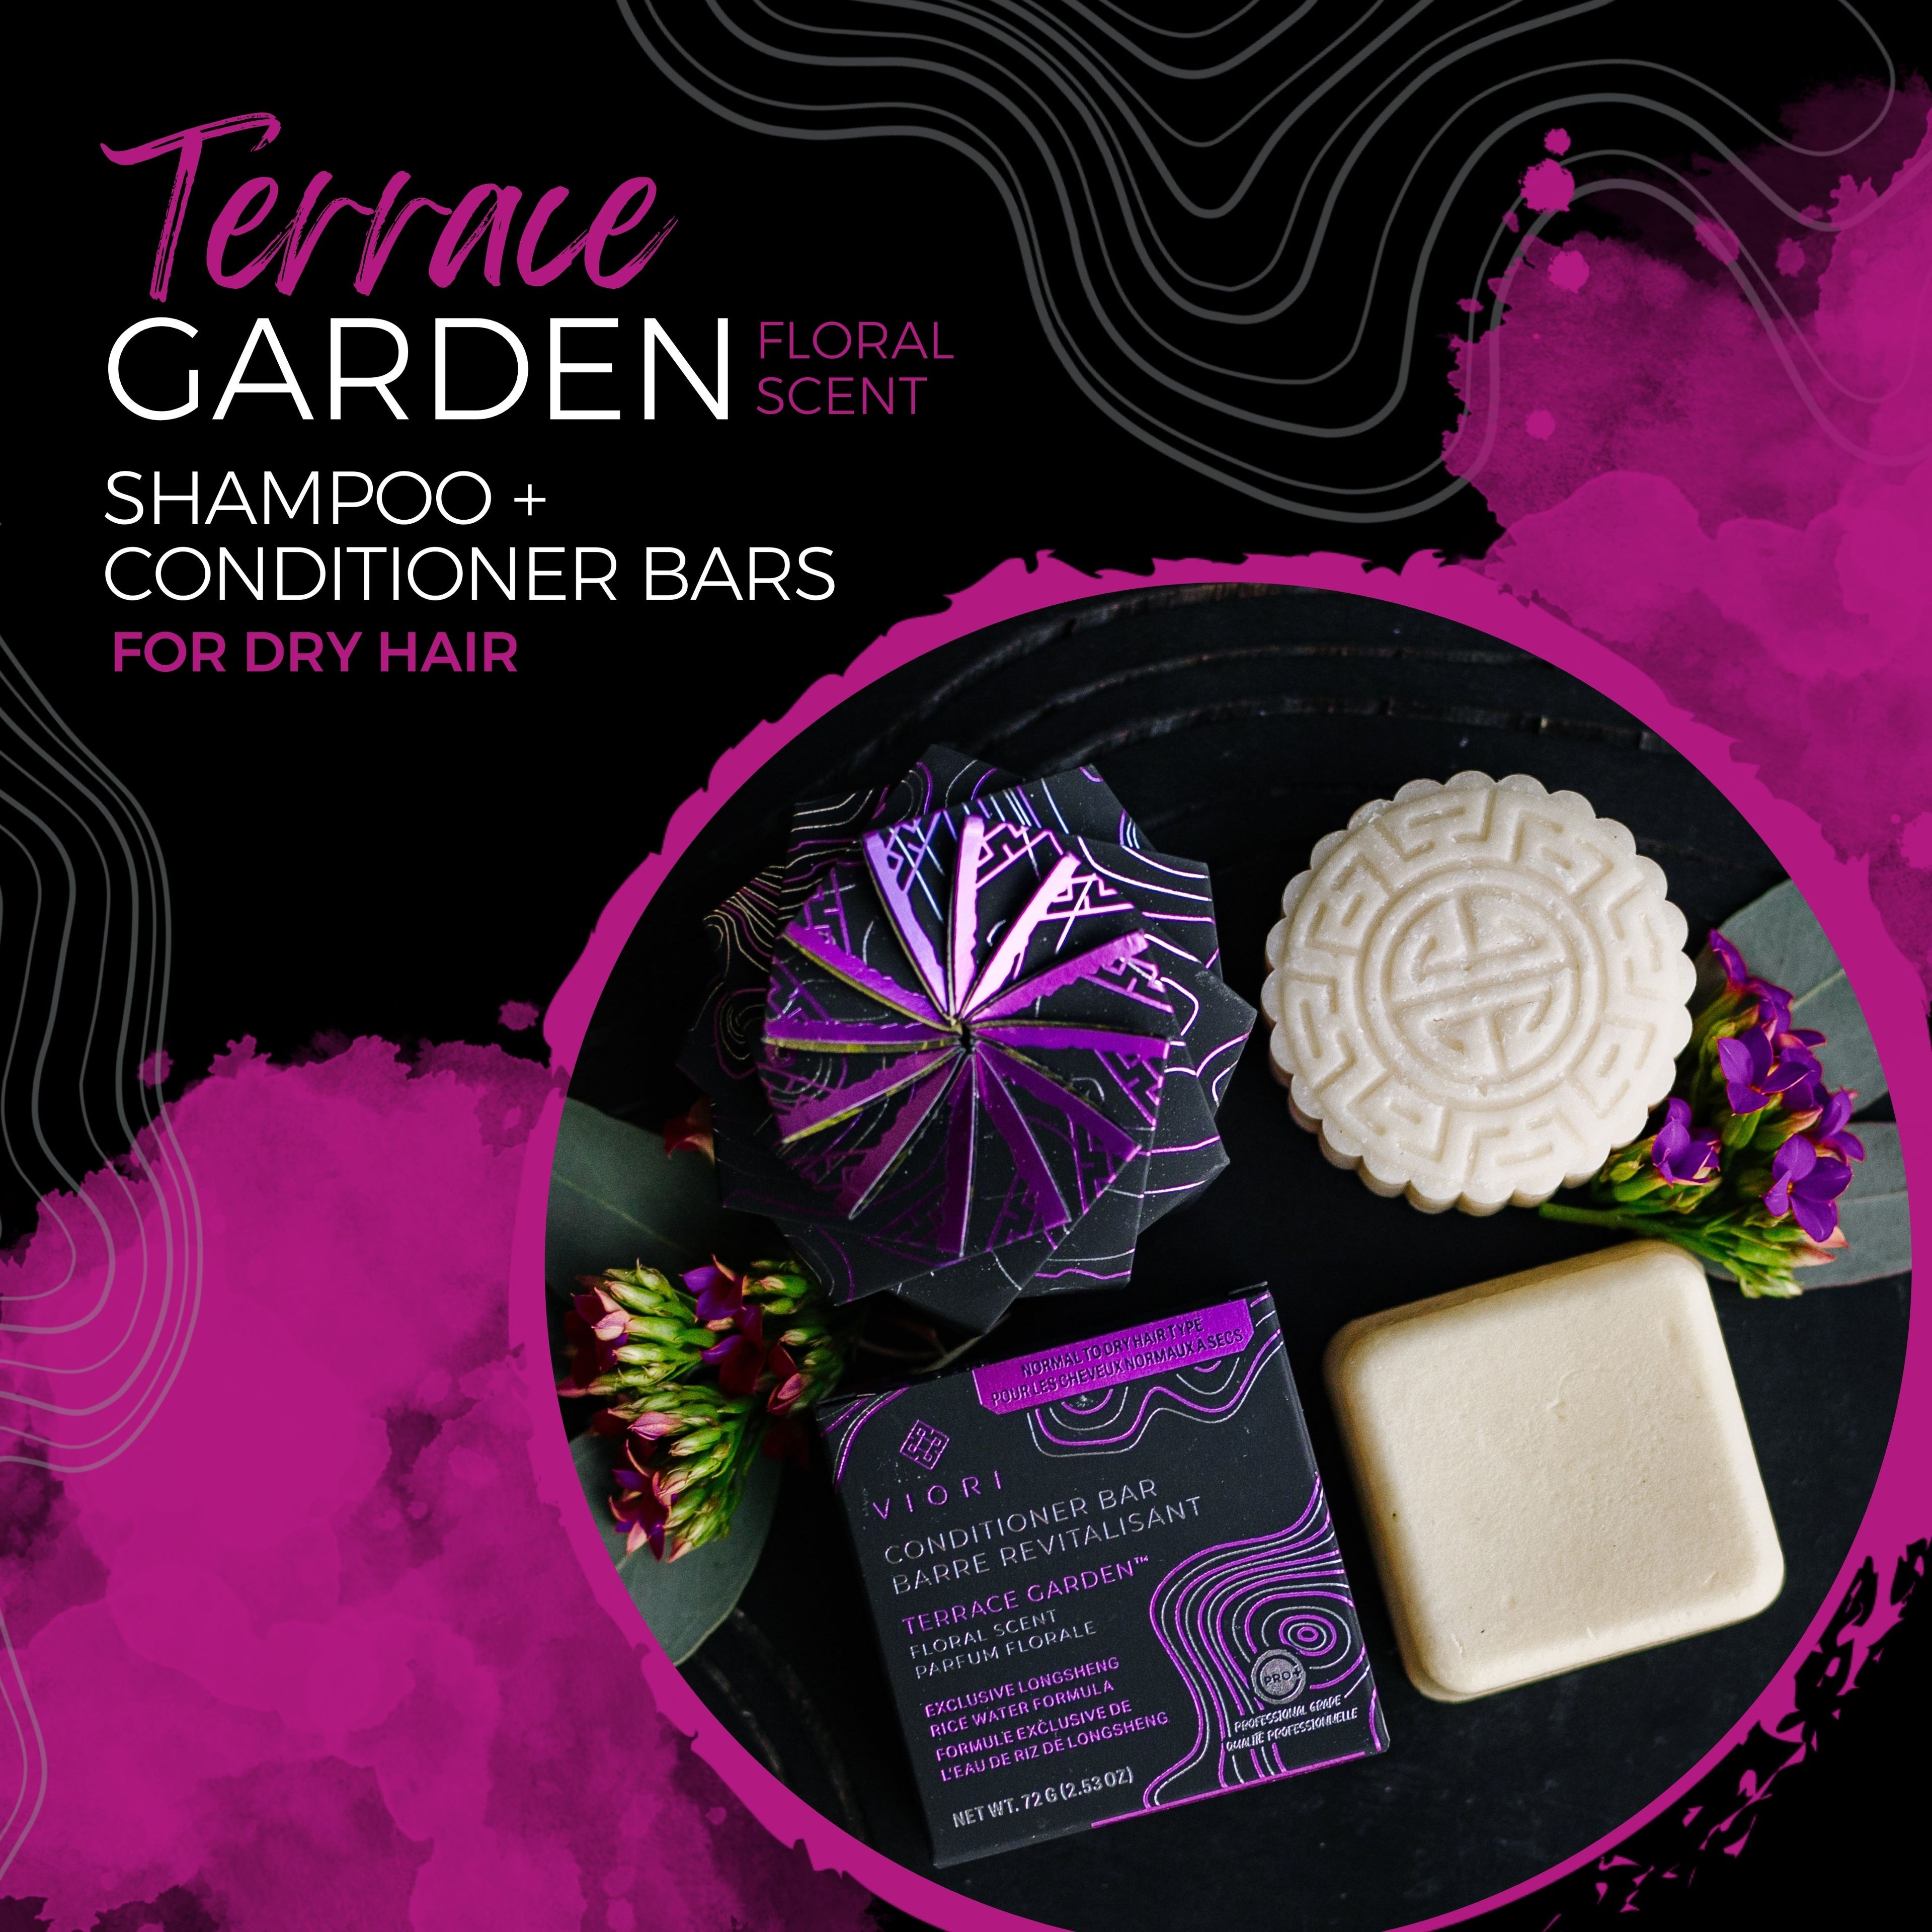 Shampoo Hair Bar Terrace Garden Floral Scented *Normal to Dry Hair Types*